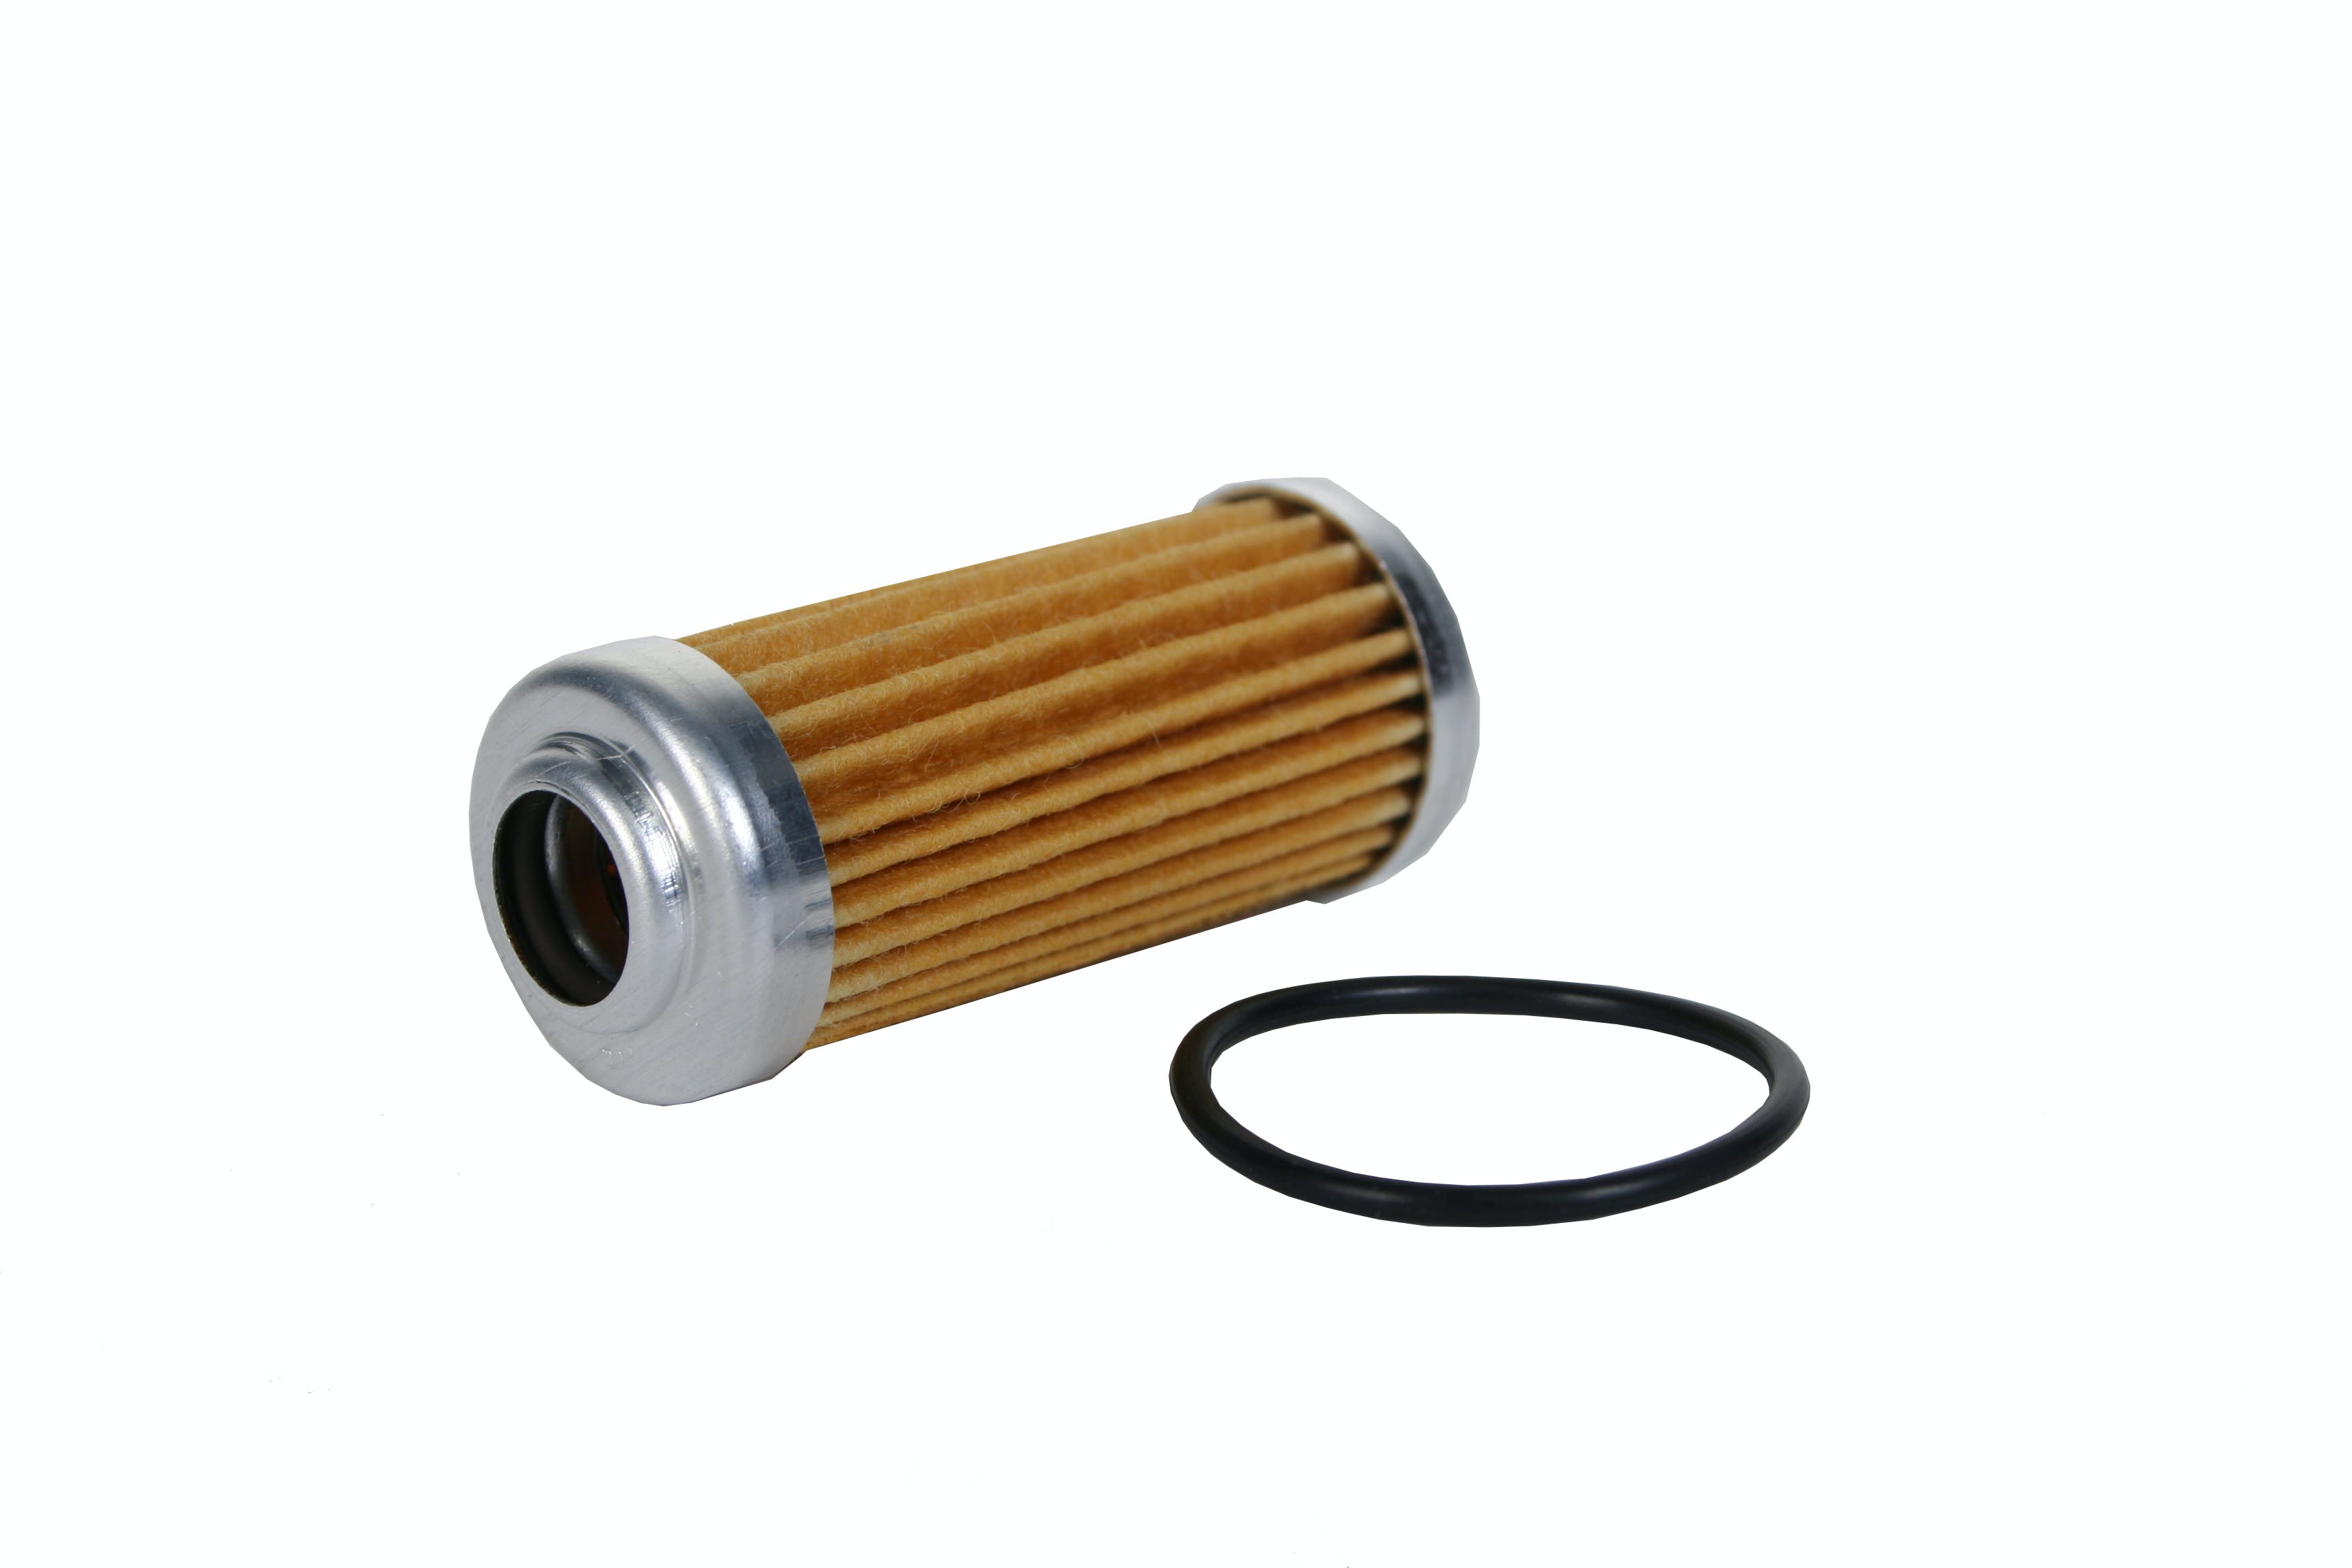 Aeromotive Fuel System 12603 40 micron fabric element for 12303 filter assembly, also fit 12316,12353 filters